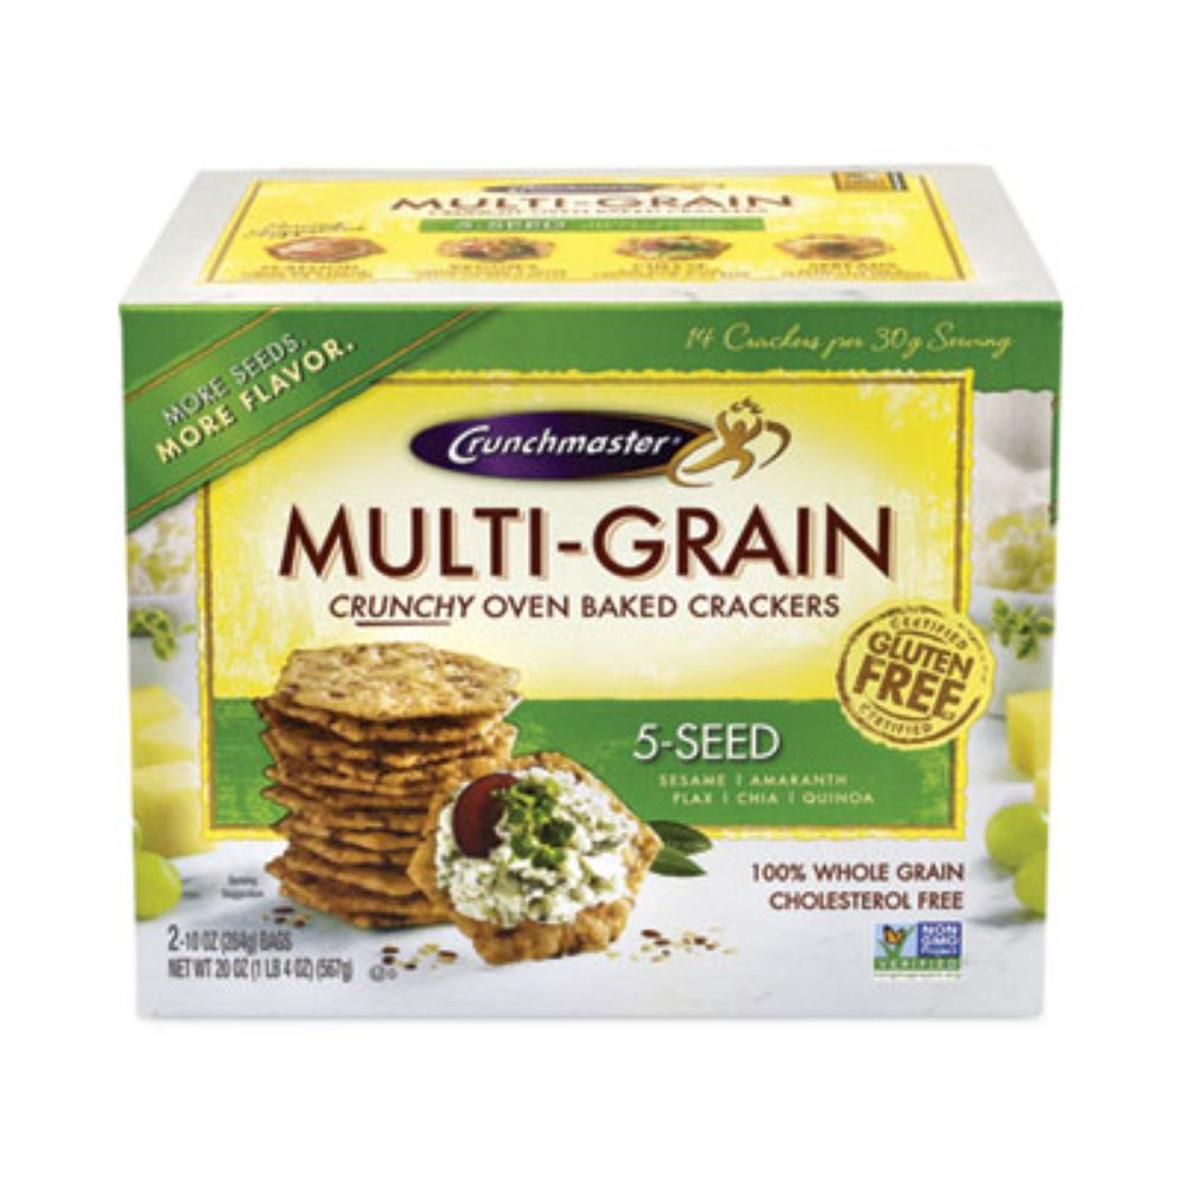 Crunchmaster 5-seed Multigrain Crunchy Oven Baked Crackers, Whole Wheat